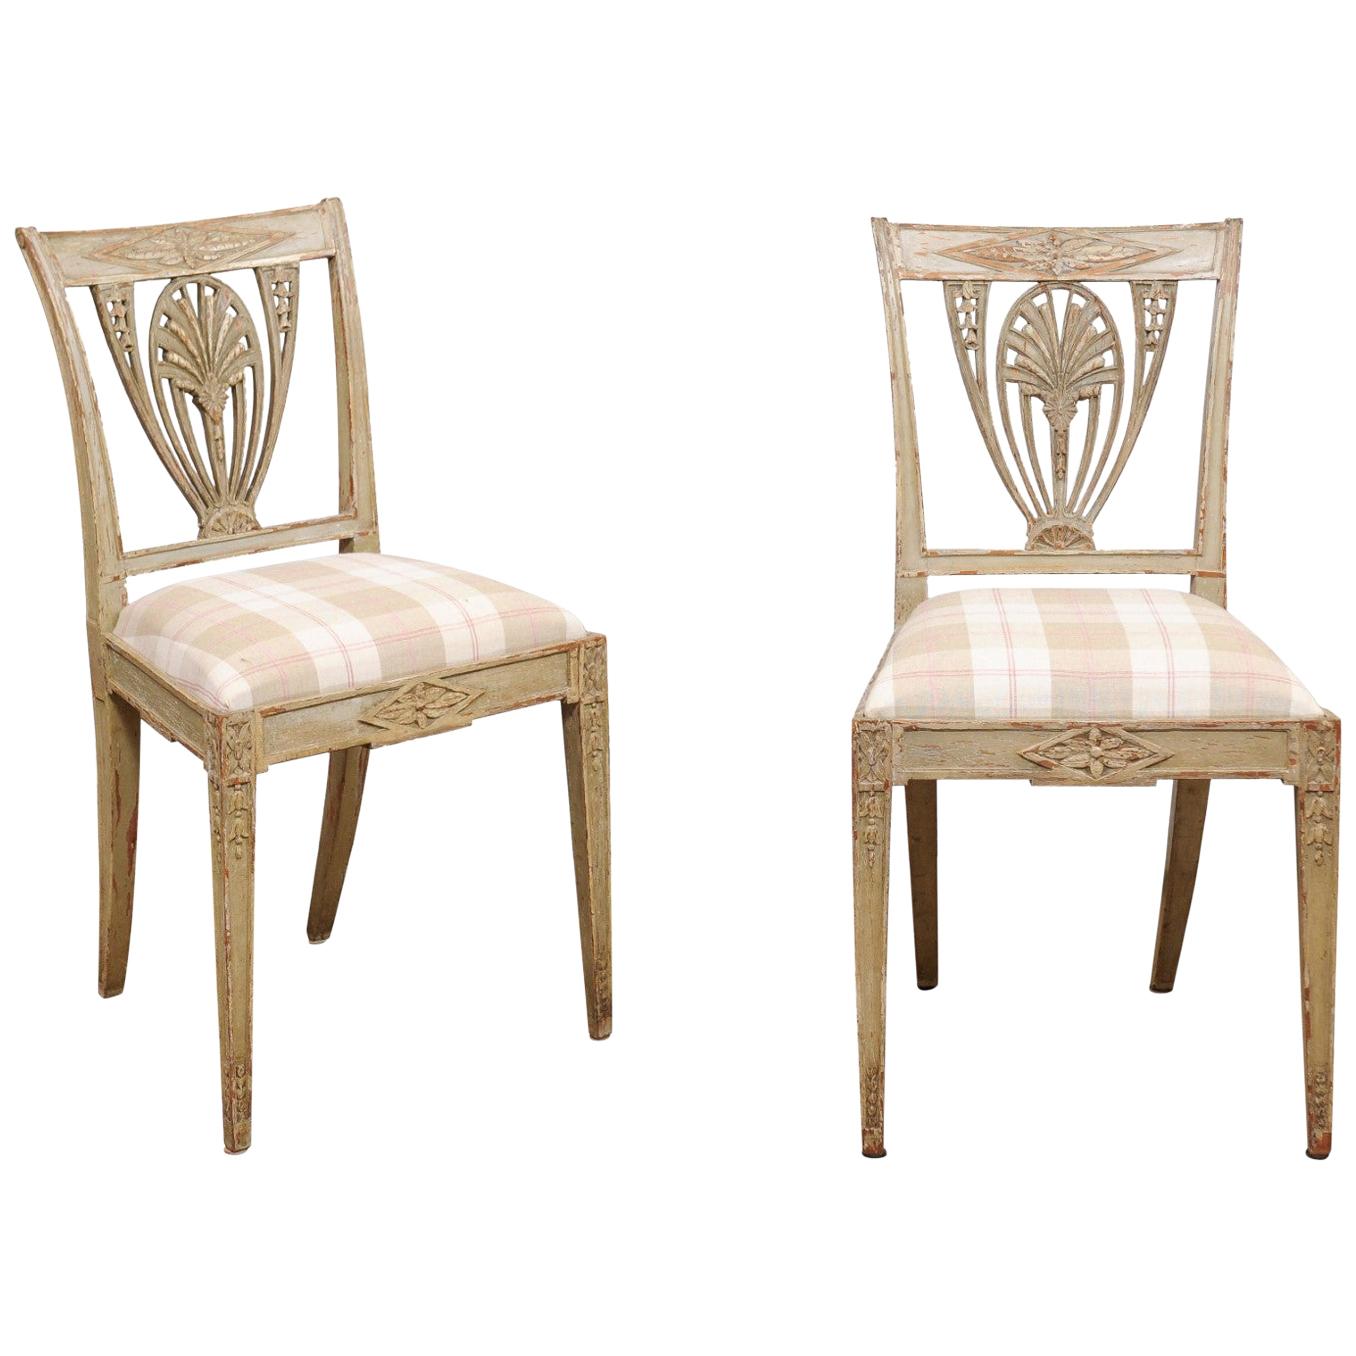 Pair of Neoclassical Style Painted Swedish Side Chairs, circa 1890